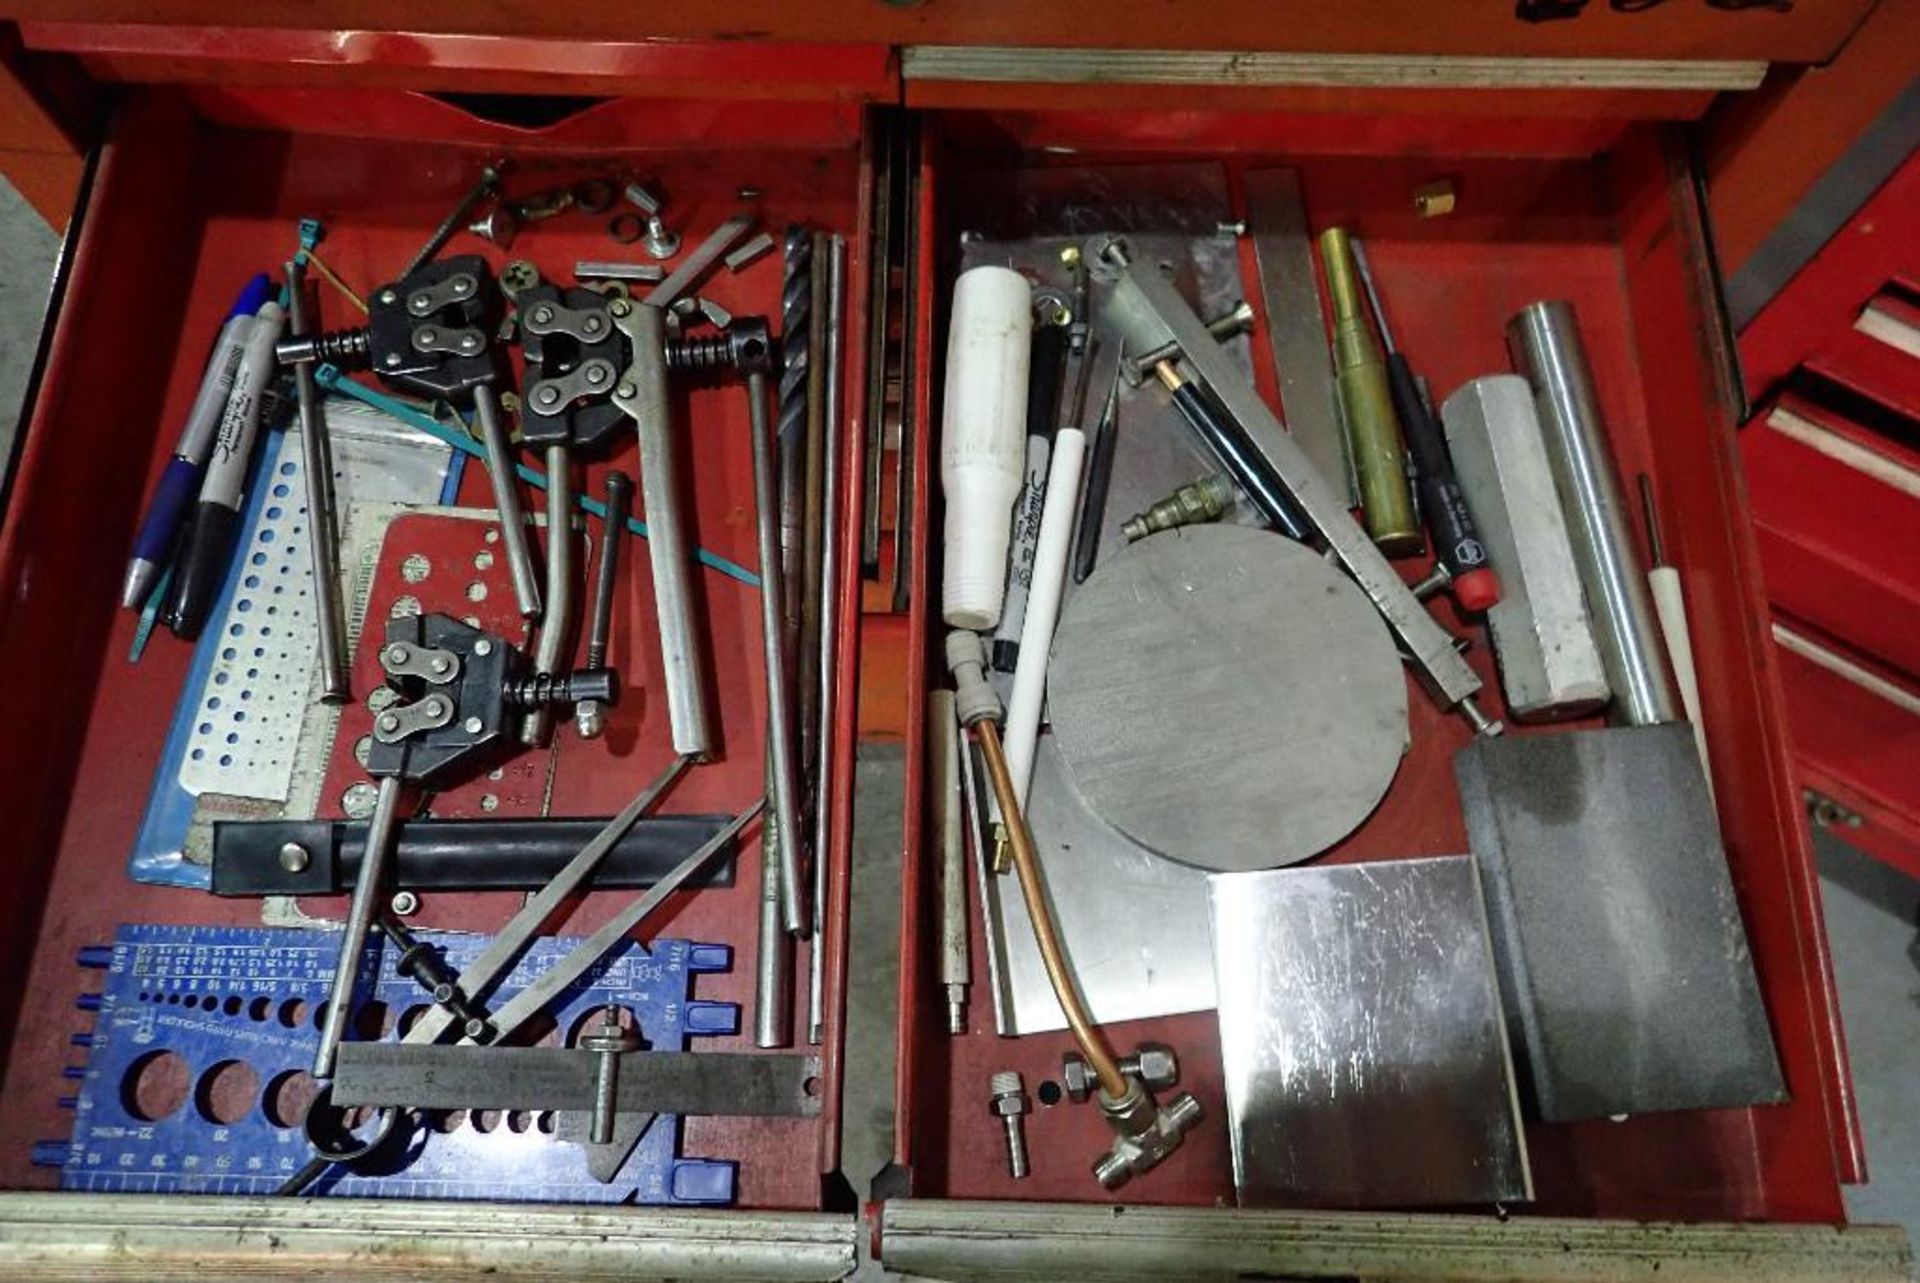 (2) tool chests with contents, wrenches, sockets, drill bits screw drivers, air tools, hammers, plie - Image 25 of 31